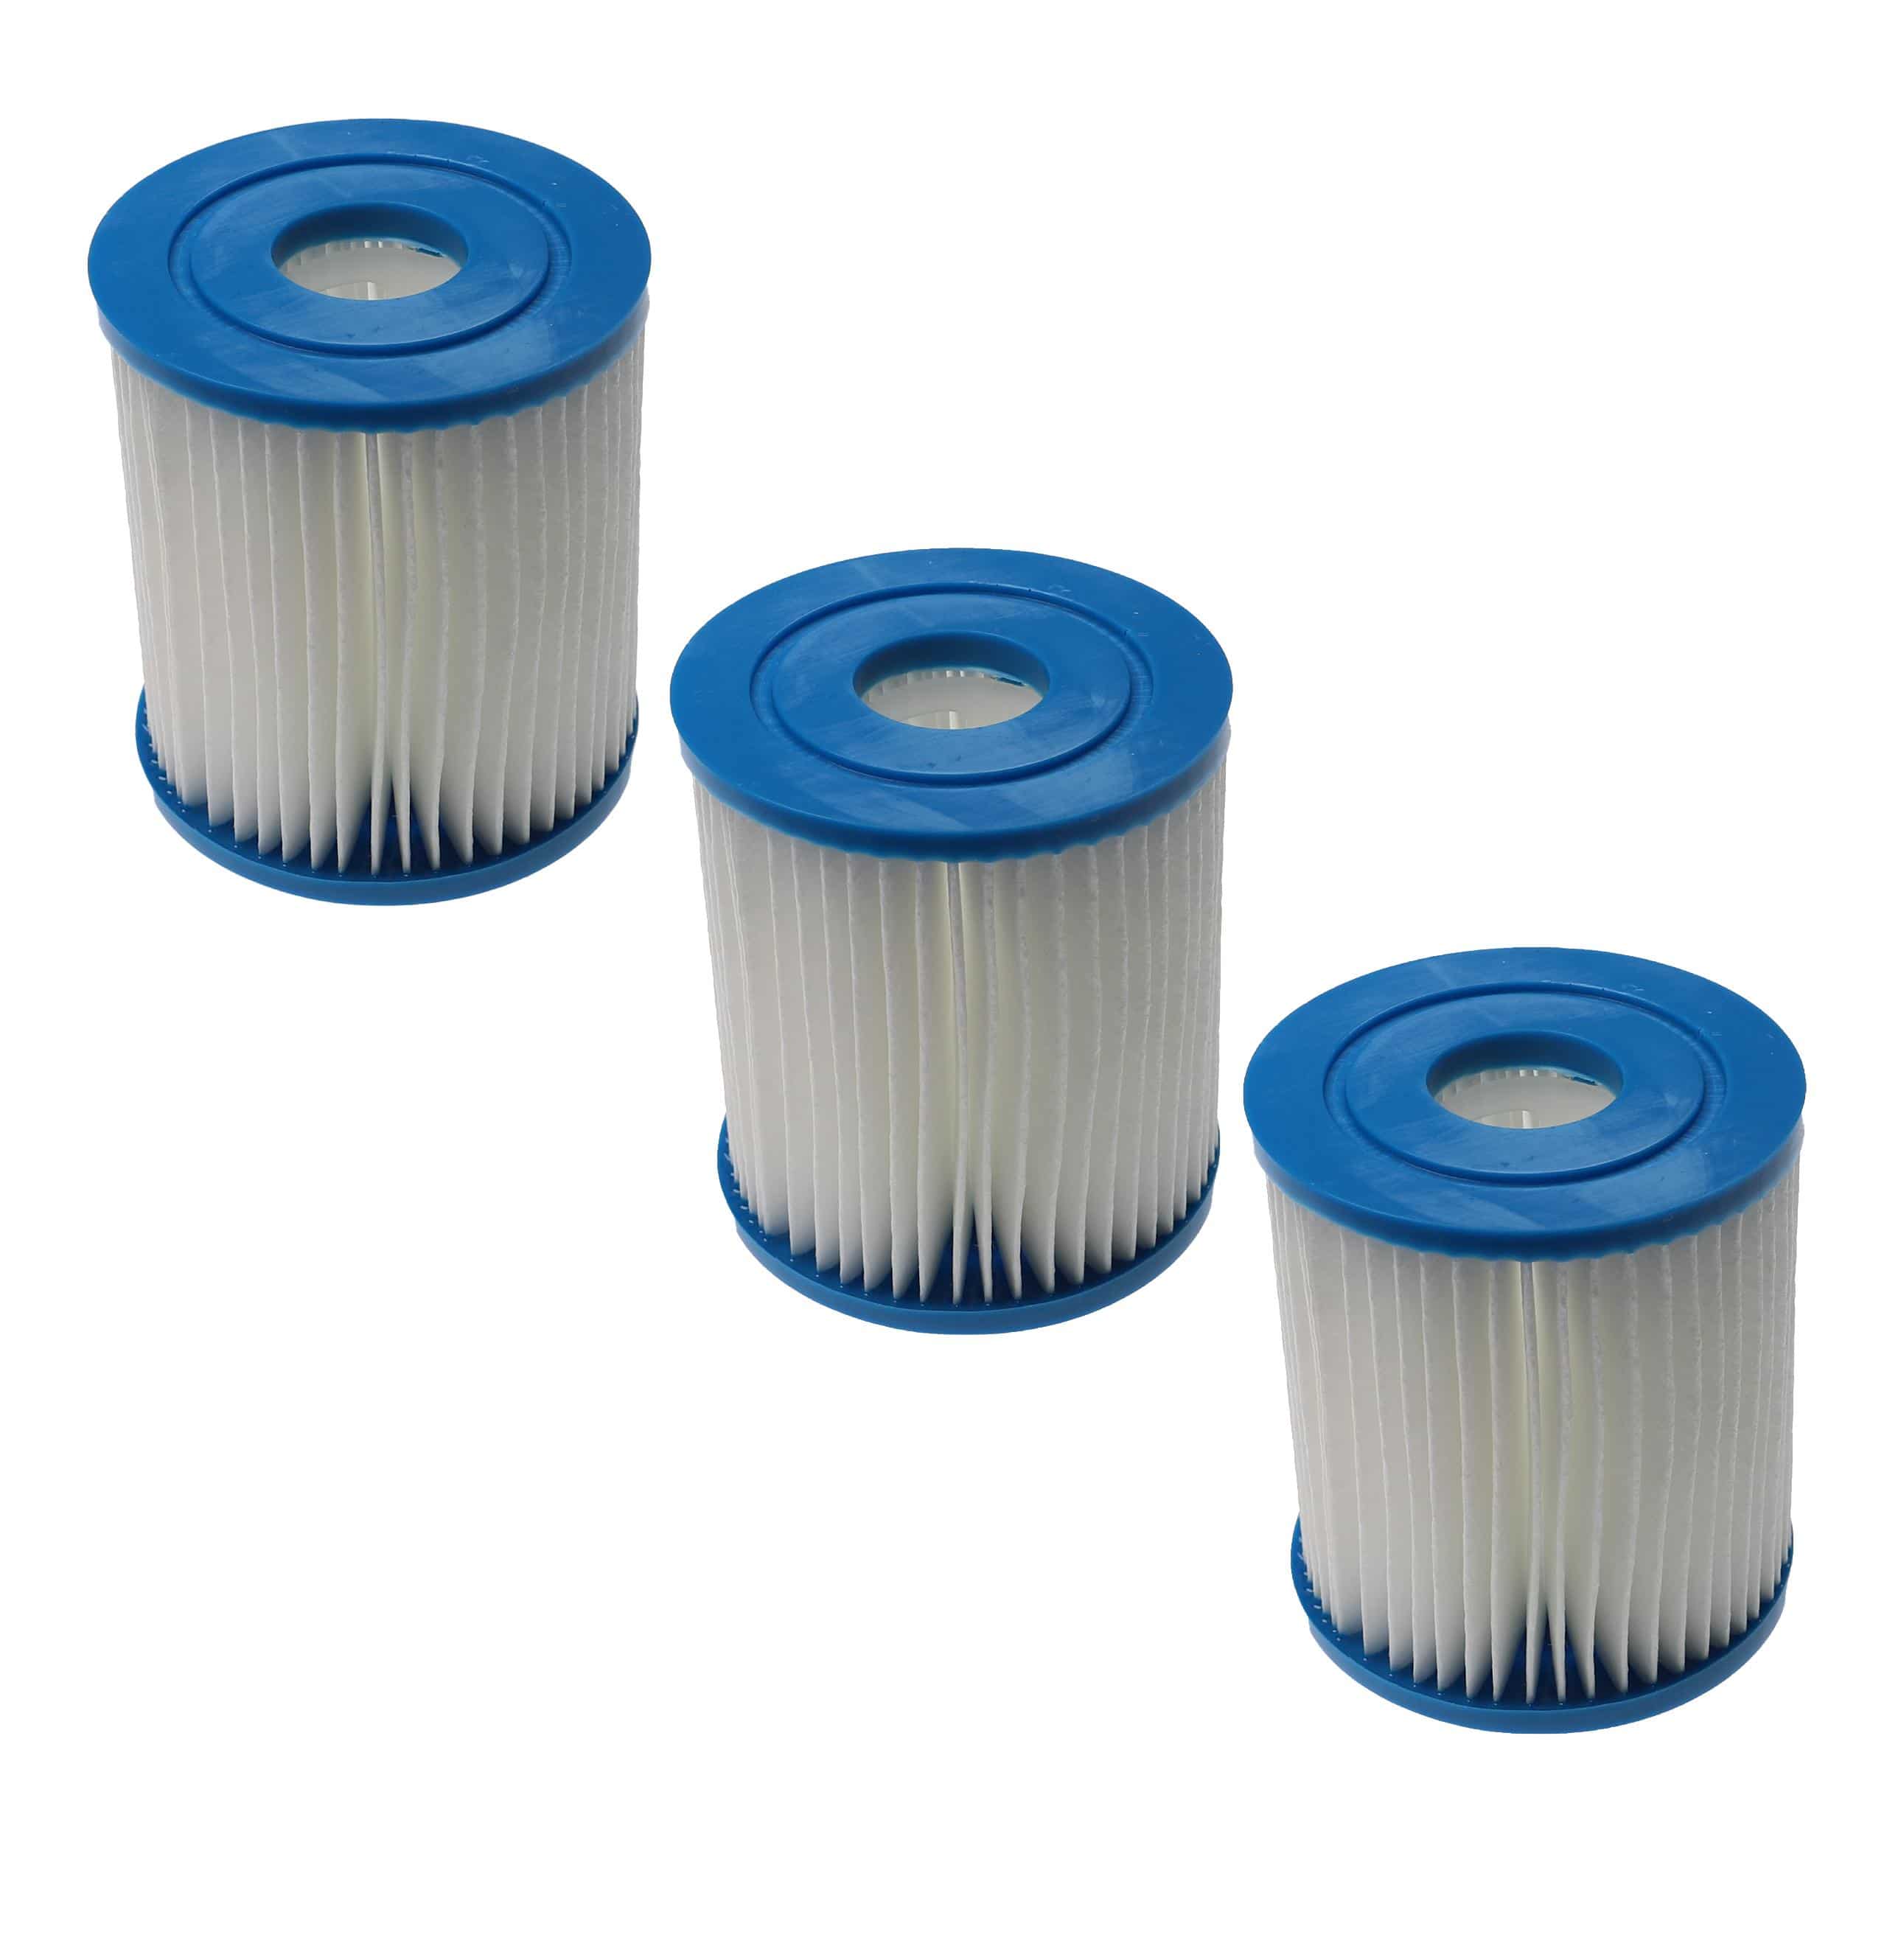  3x Filter Cartridge replaces APC C7490 for Bestway Swimming Pool, Filter Pump - Blue White